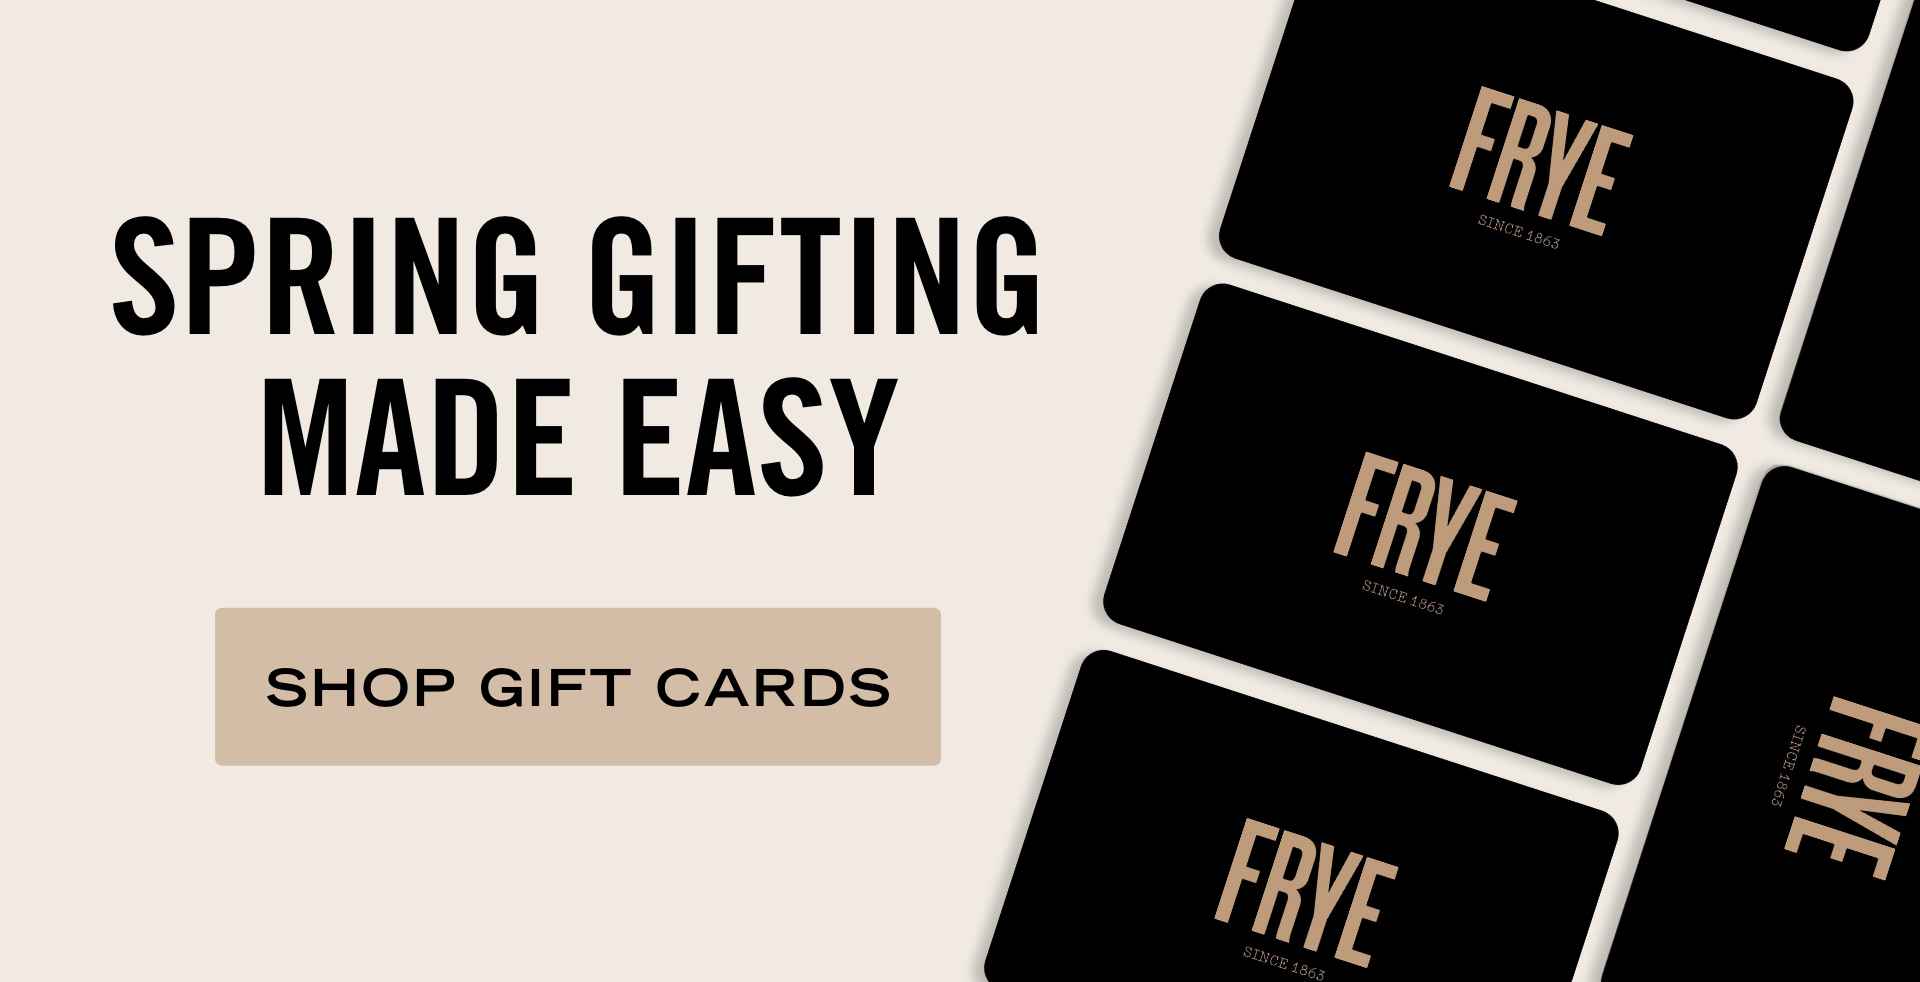 SHOP GIFT CARDS NOW